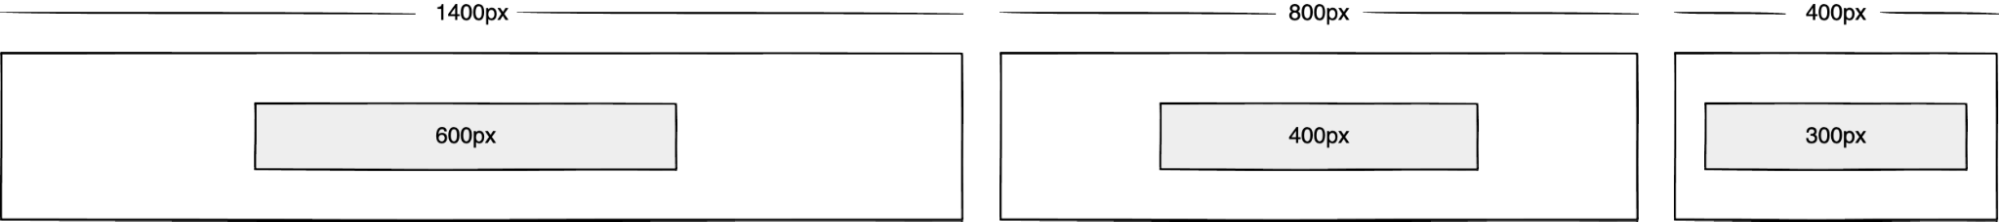 Wireframe showing an 800px box inside of a 1400px box, a 400px box inside of an 800px box, and a 300px box inside of a 400px box